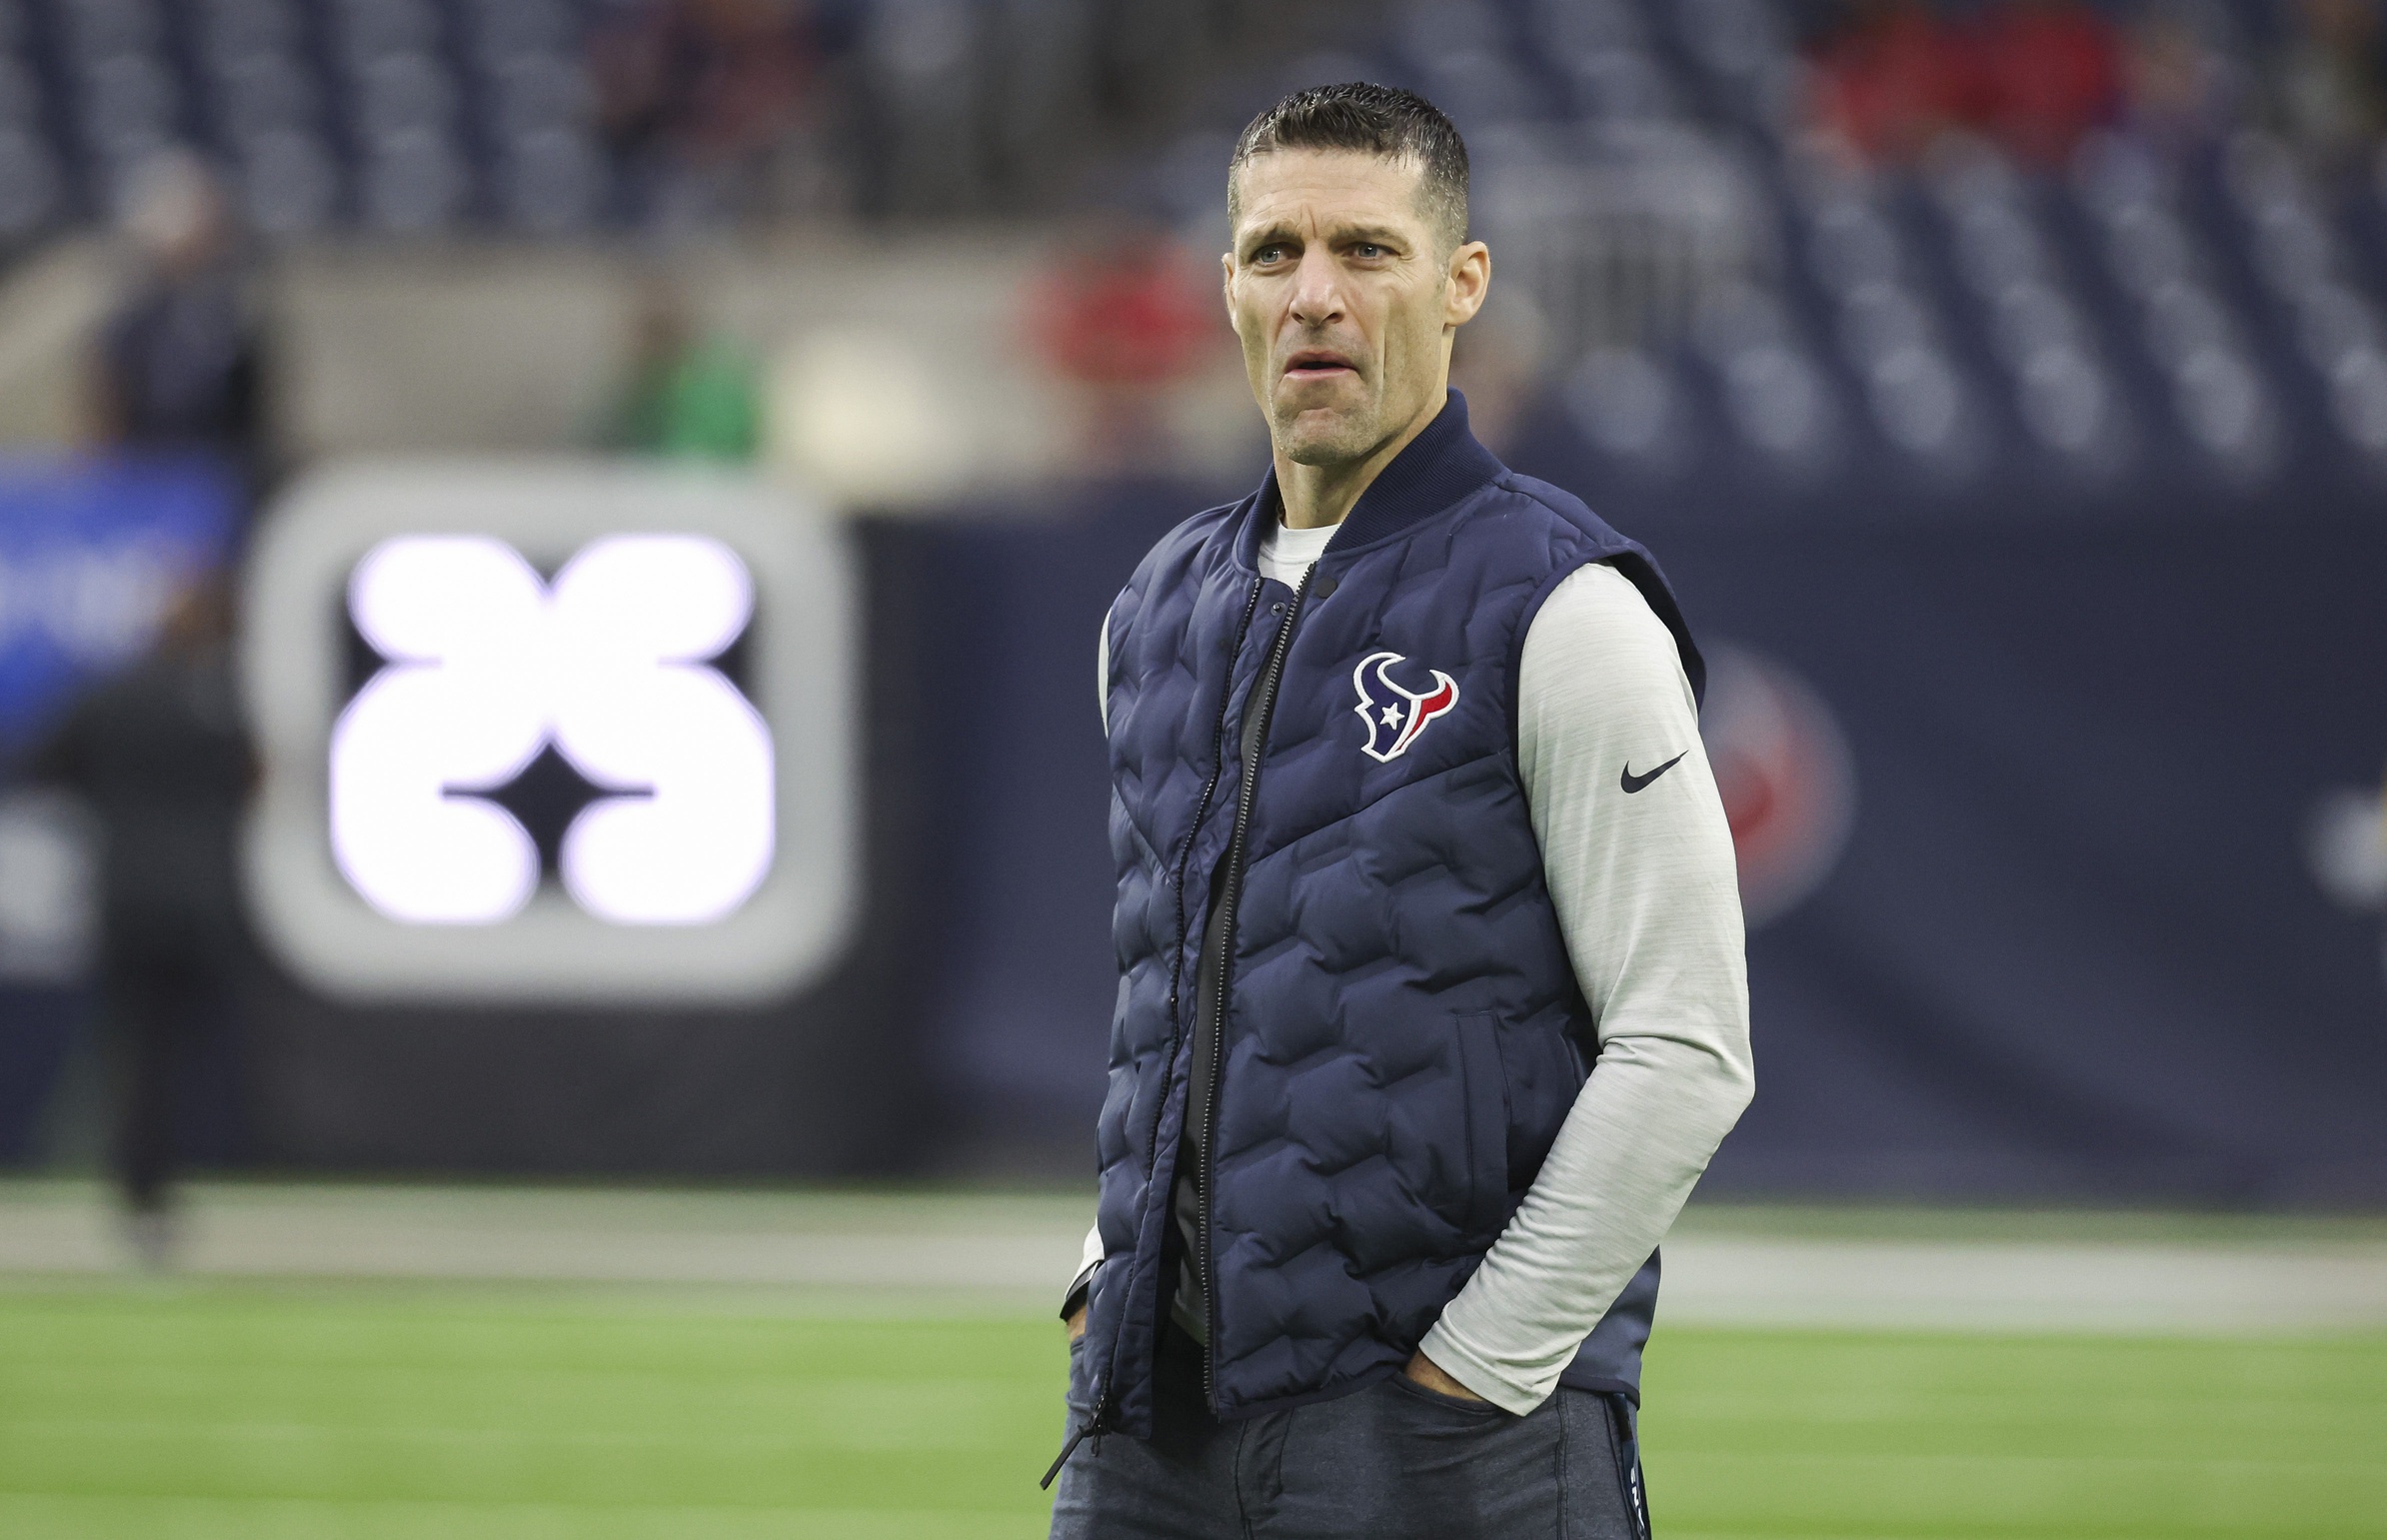 NFL Draft Rumors: Could the Houston Texans Trade Down From No. 2?